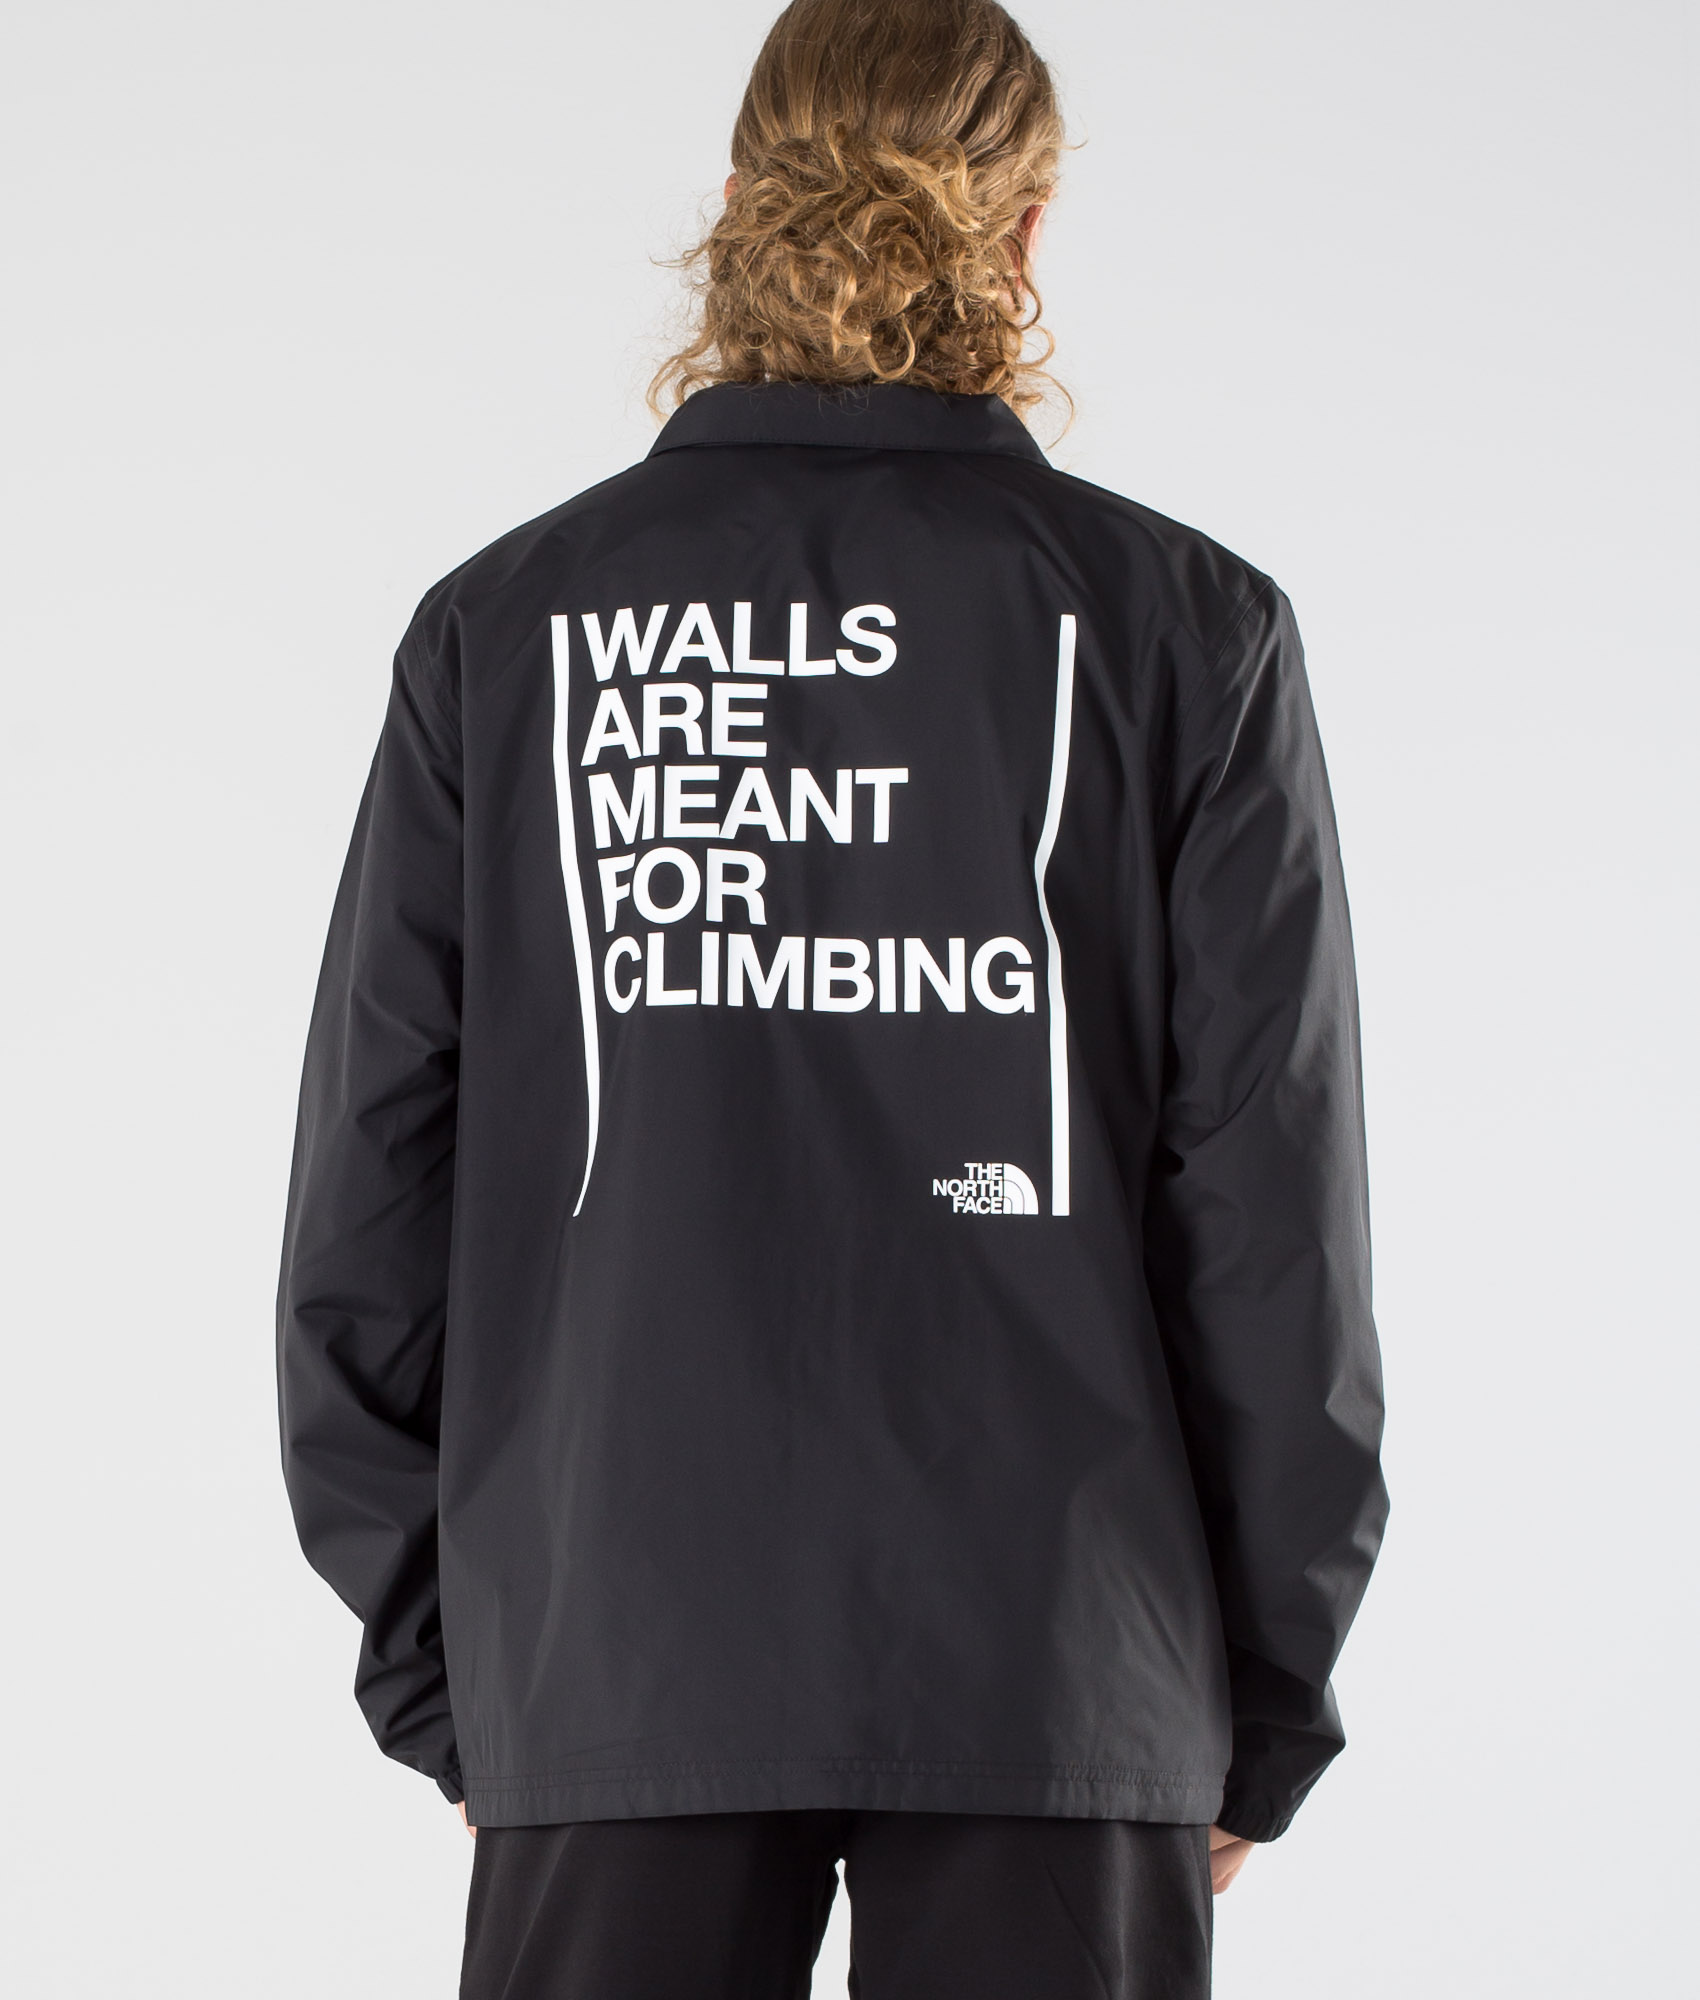 The North Face Walls Are Meant For 